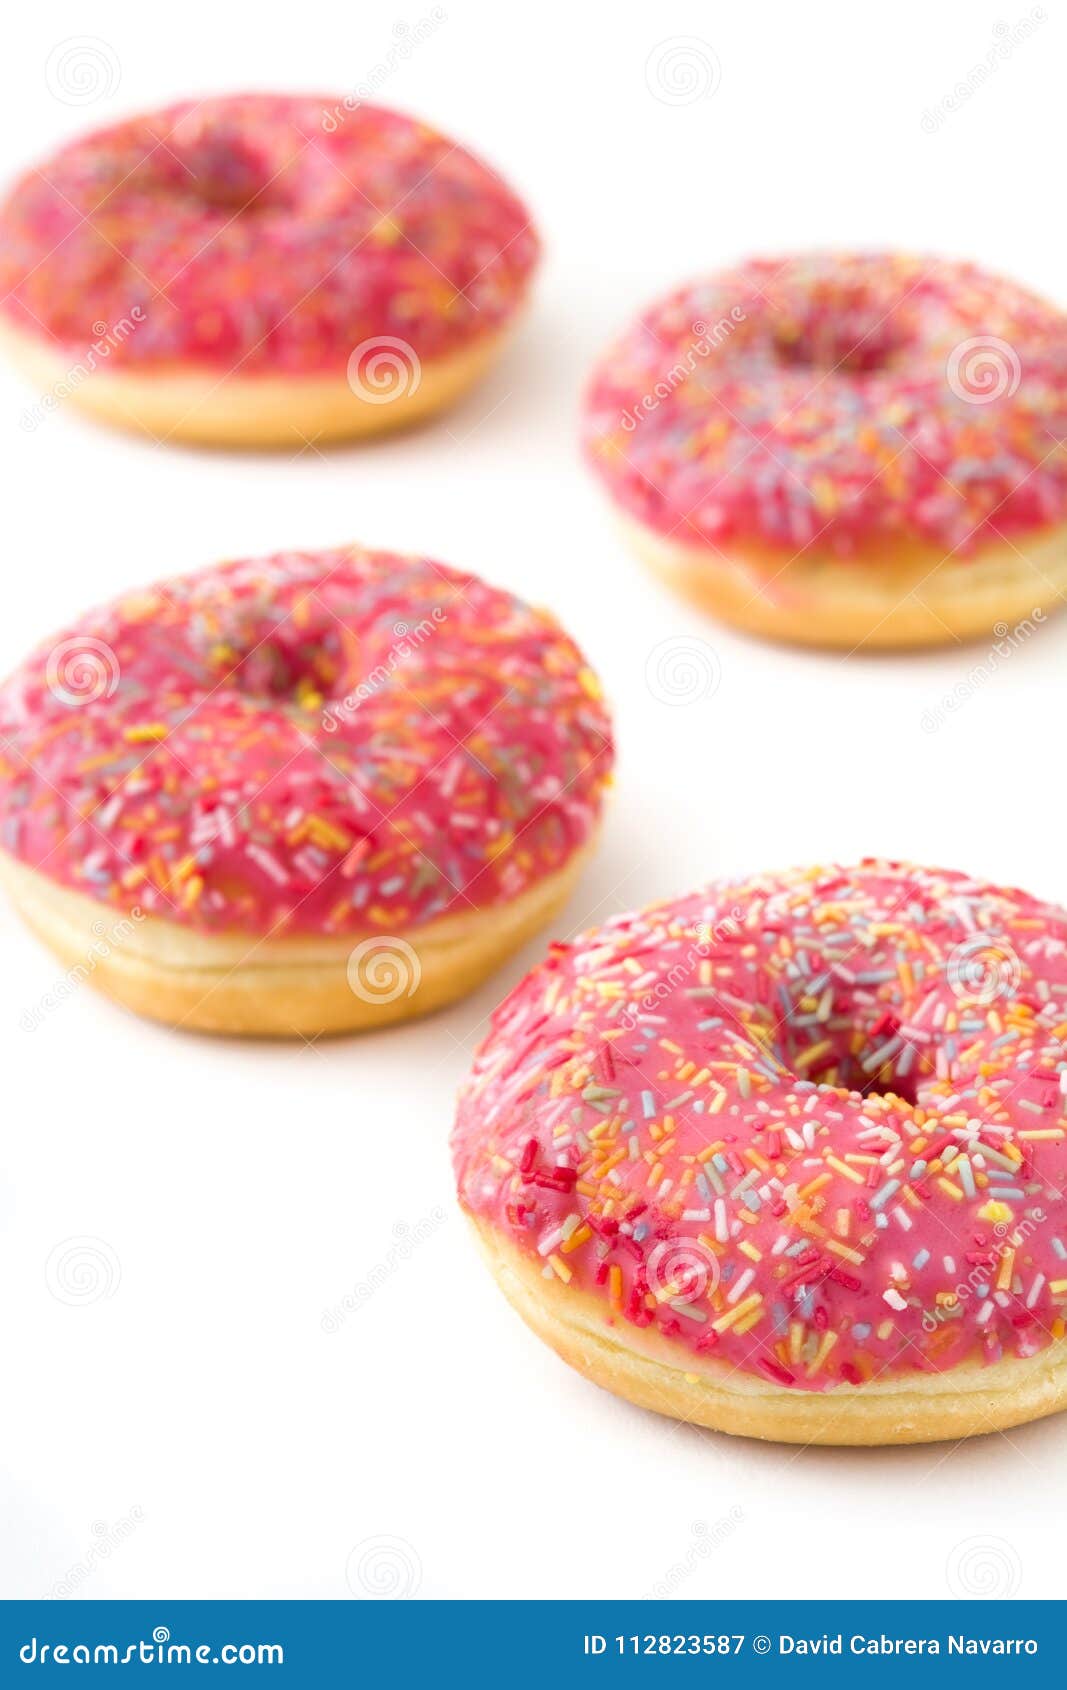 Pink frosted donut with colorful sprinkles isolated on white background.